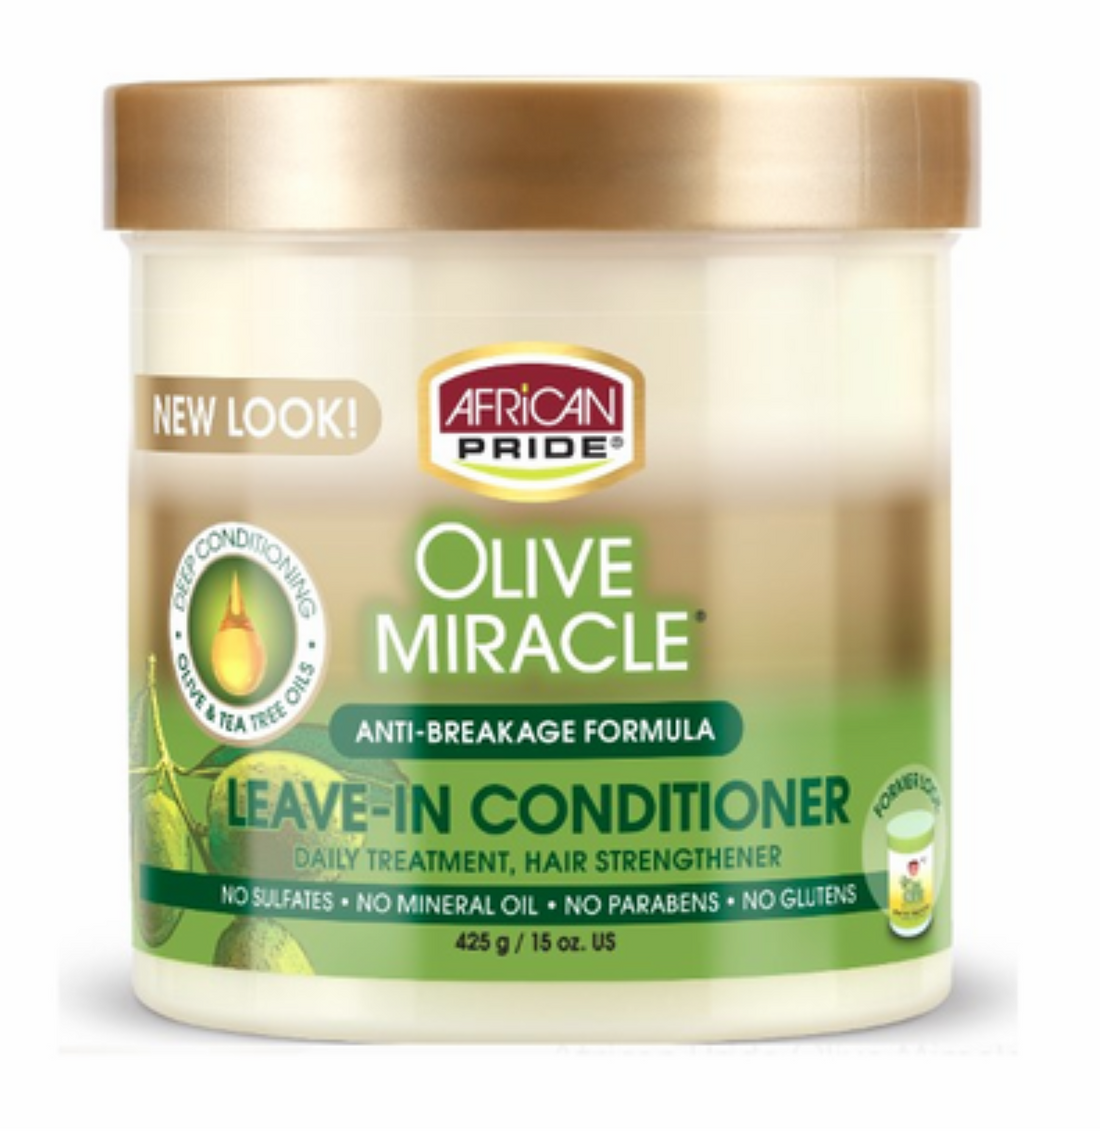 AFRICAN PRIDE OLIVE MIRACLE LEAVE-IN CONDITIONER 15 oz